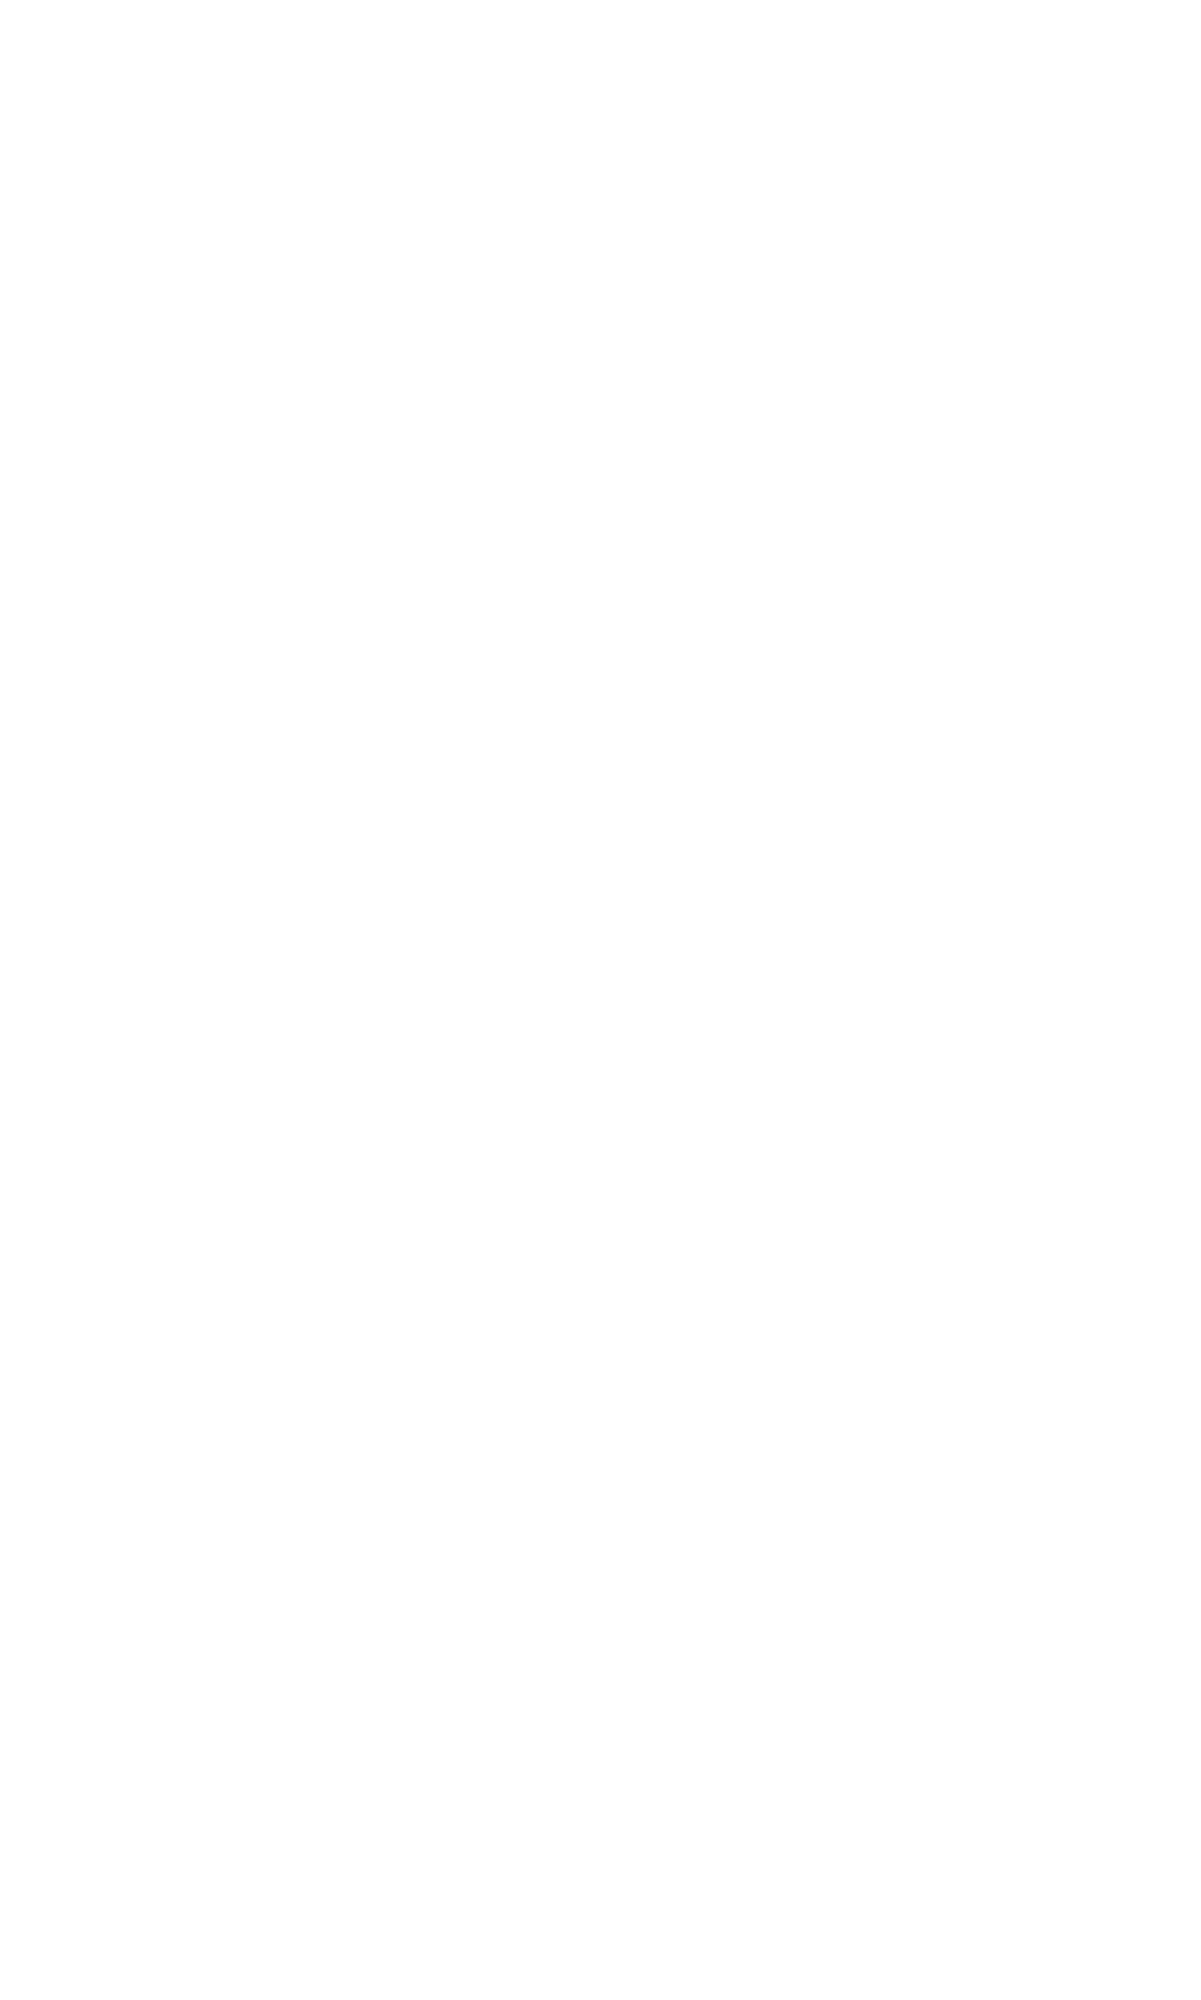 Cullen Communications is a certified B Corp